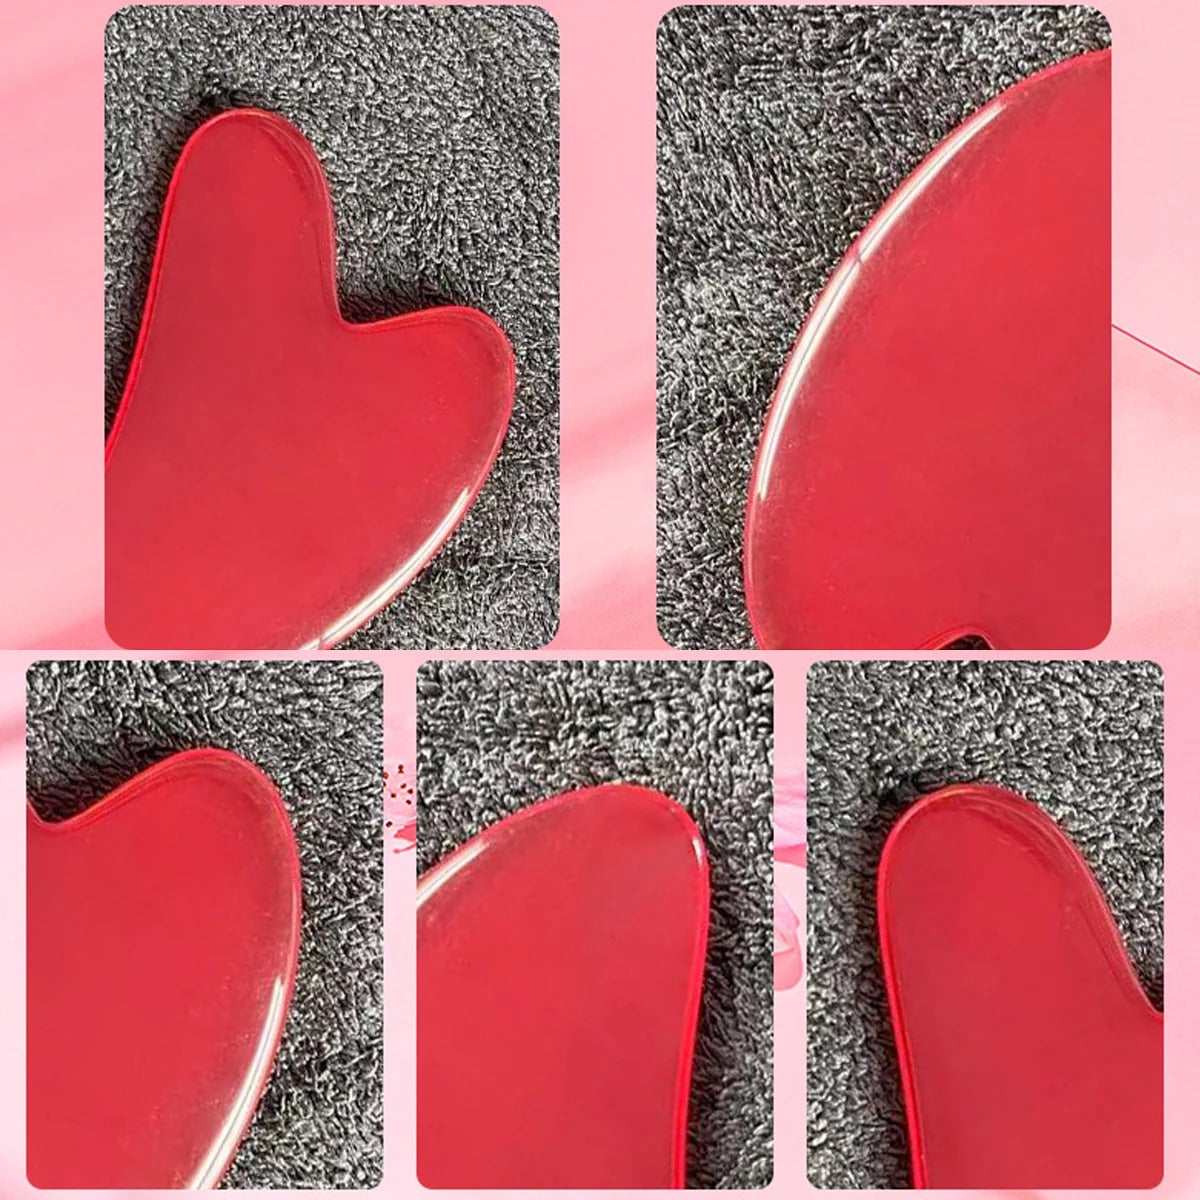 Heart Resin Gua Sha Massage Board for Face, Neck, and Body Care